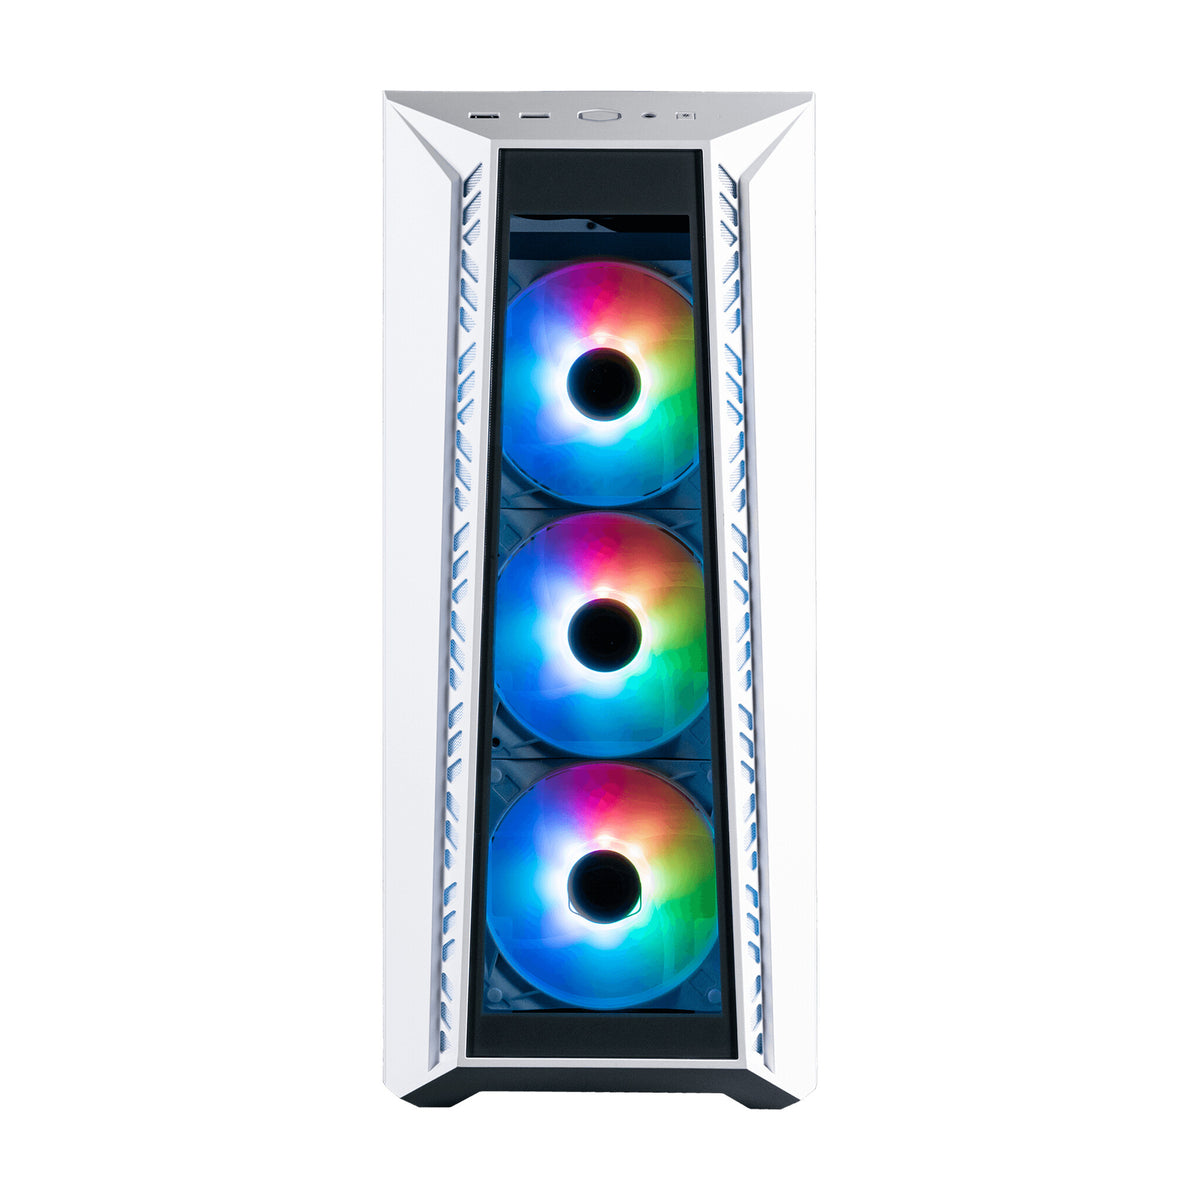 Cooler Master MasterBox 520 - ATX Mid Tower Case in White